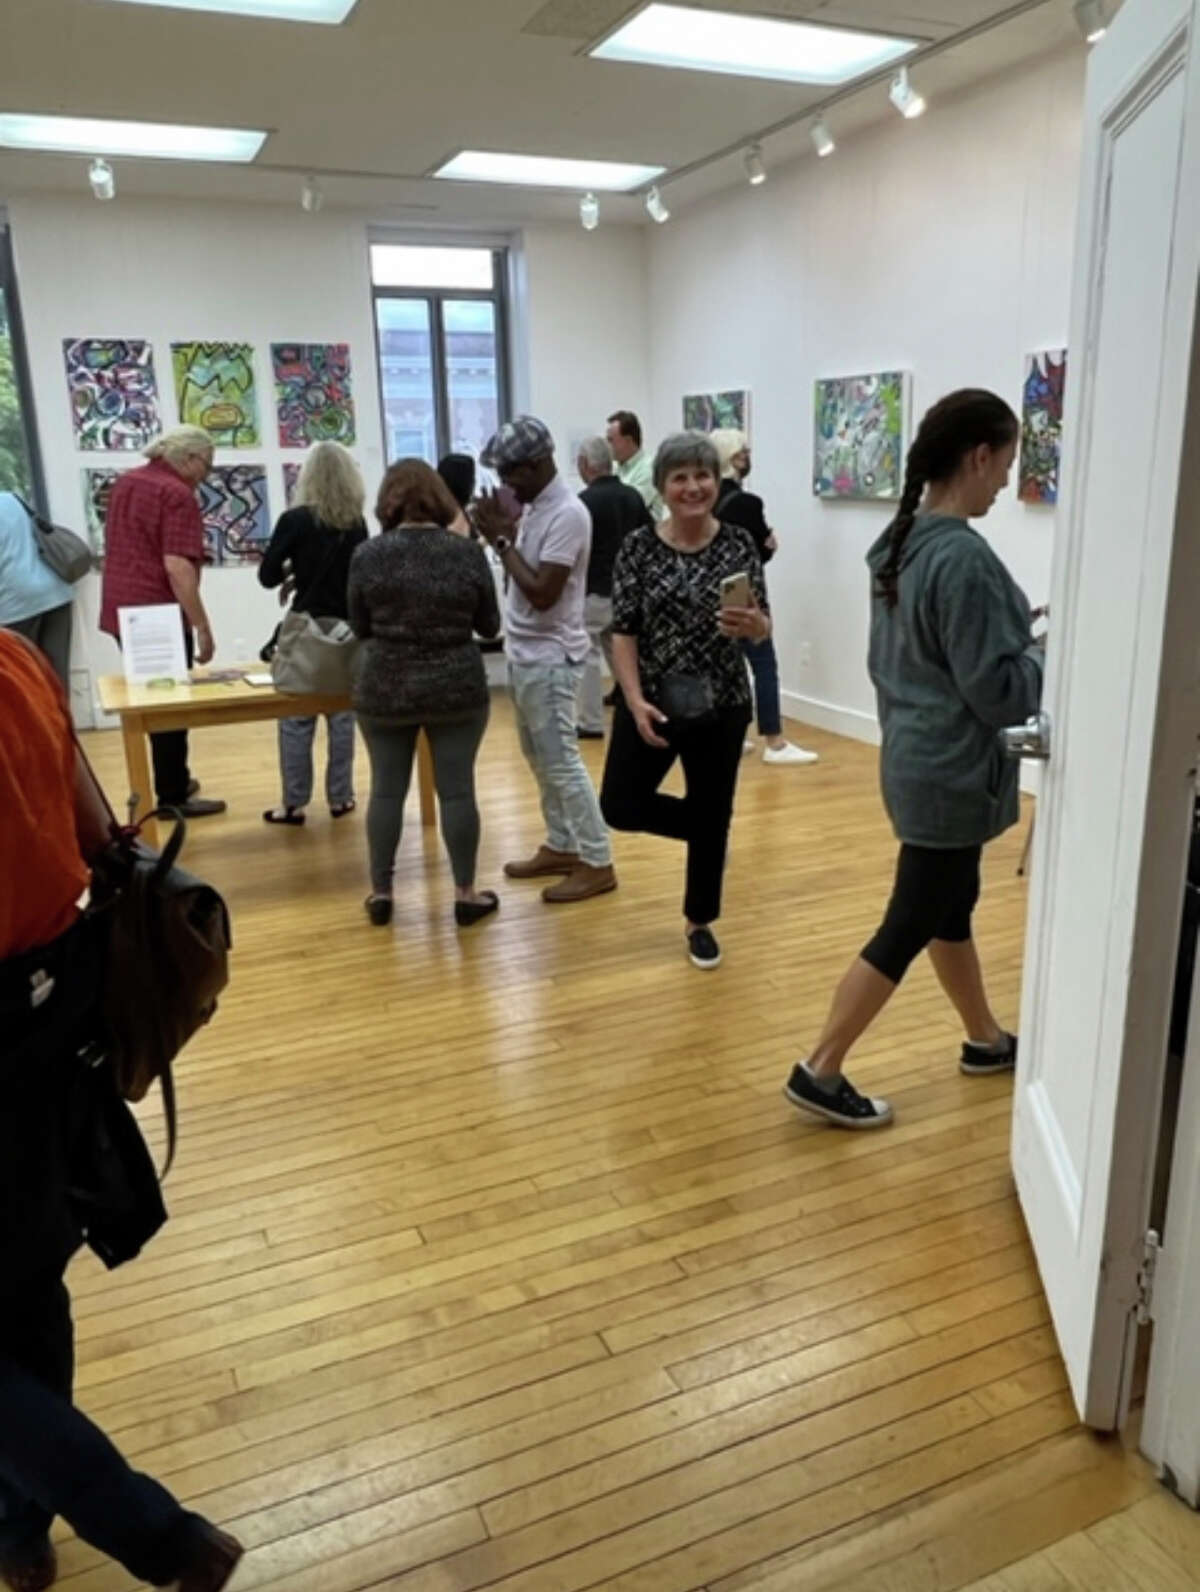 The crowd mingles at the recent opening reception fora called "Time in Place" at the Greenwich Art Society featuring the work of artist Lina Moriell. It will be on view through Sept. 30.